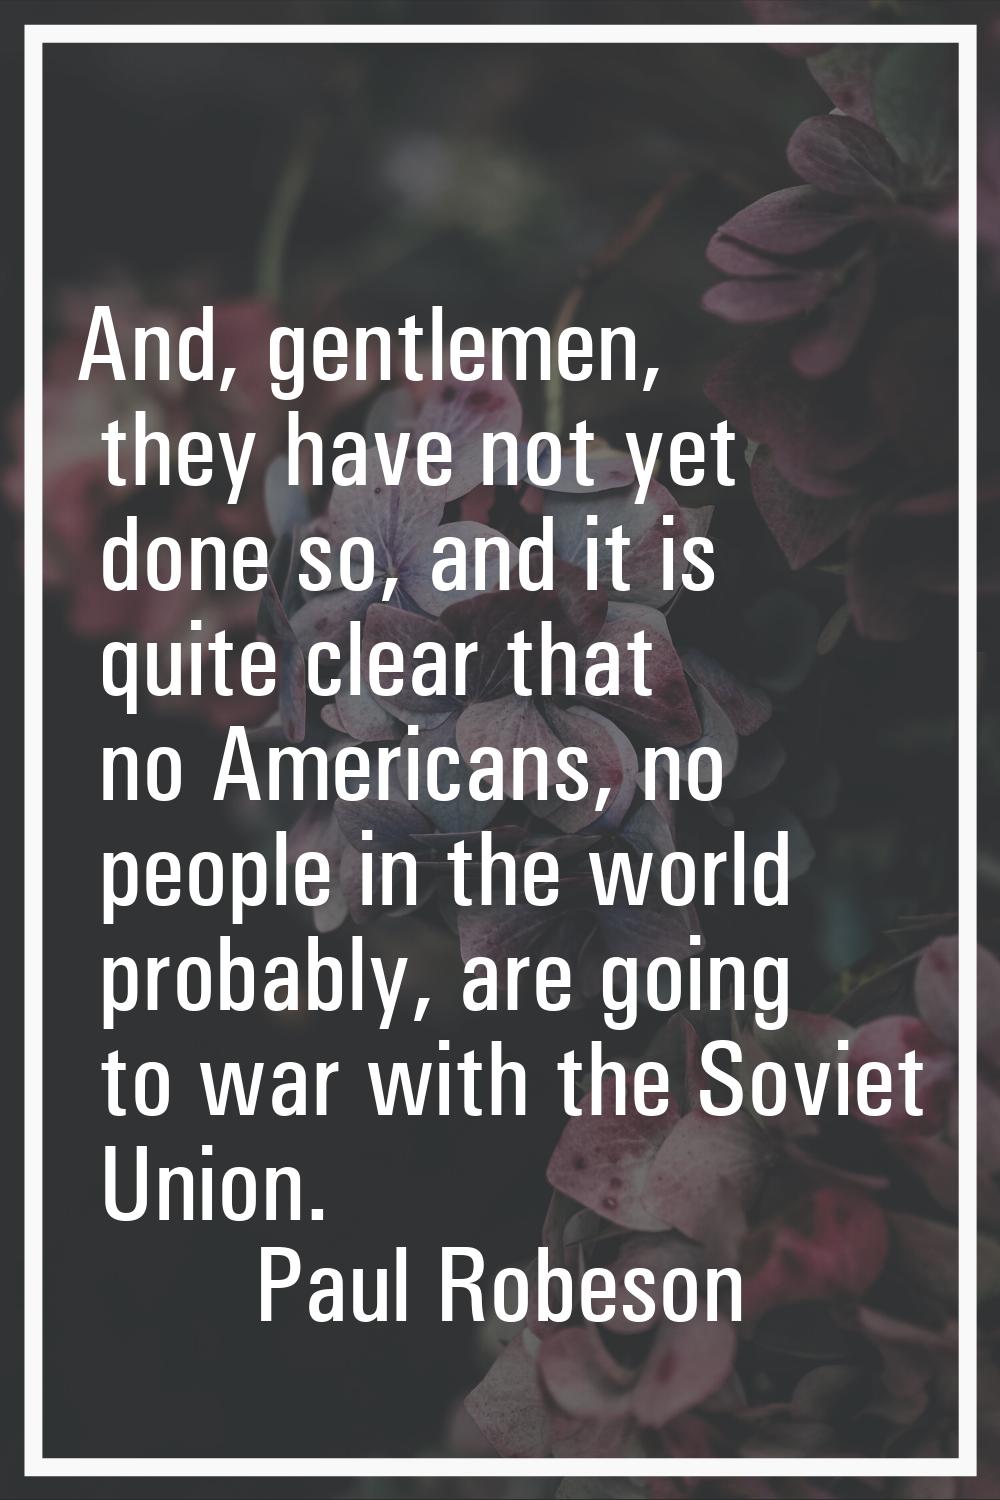 And, gentlemen, they have not yet done so, and it is quite clear that no Americans, no people in th